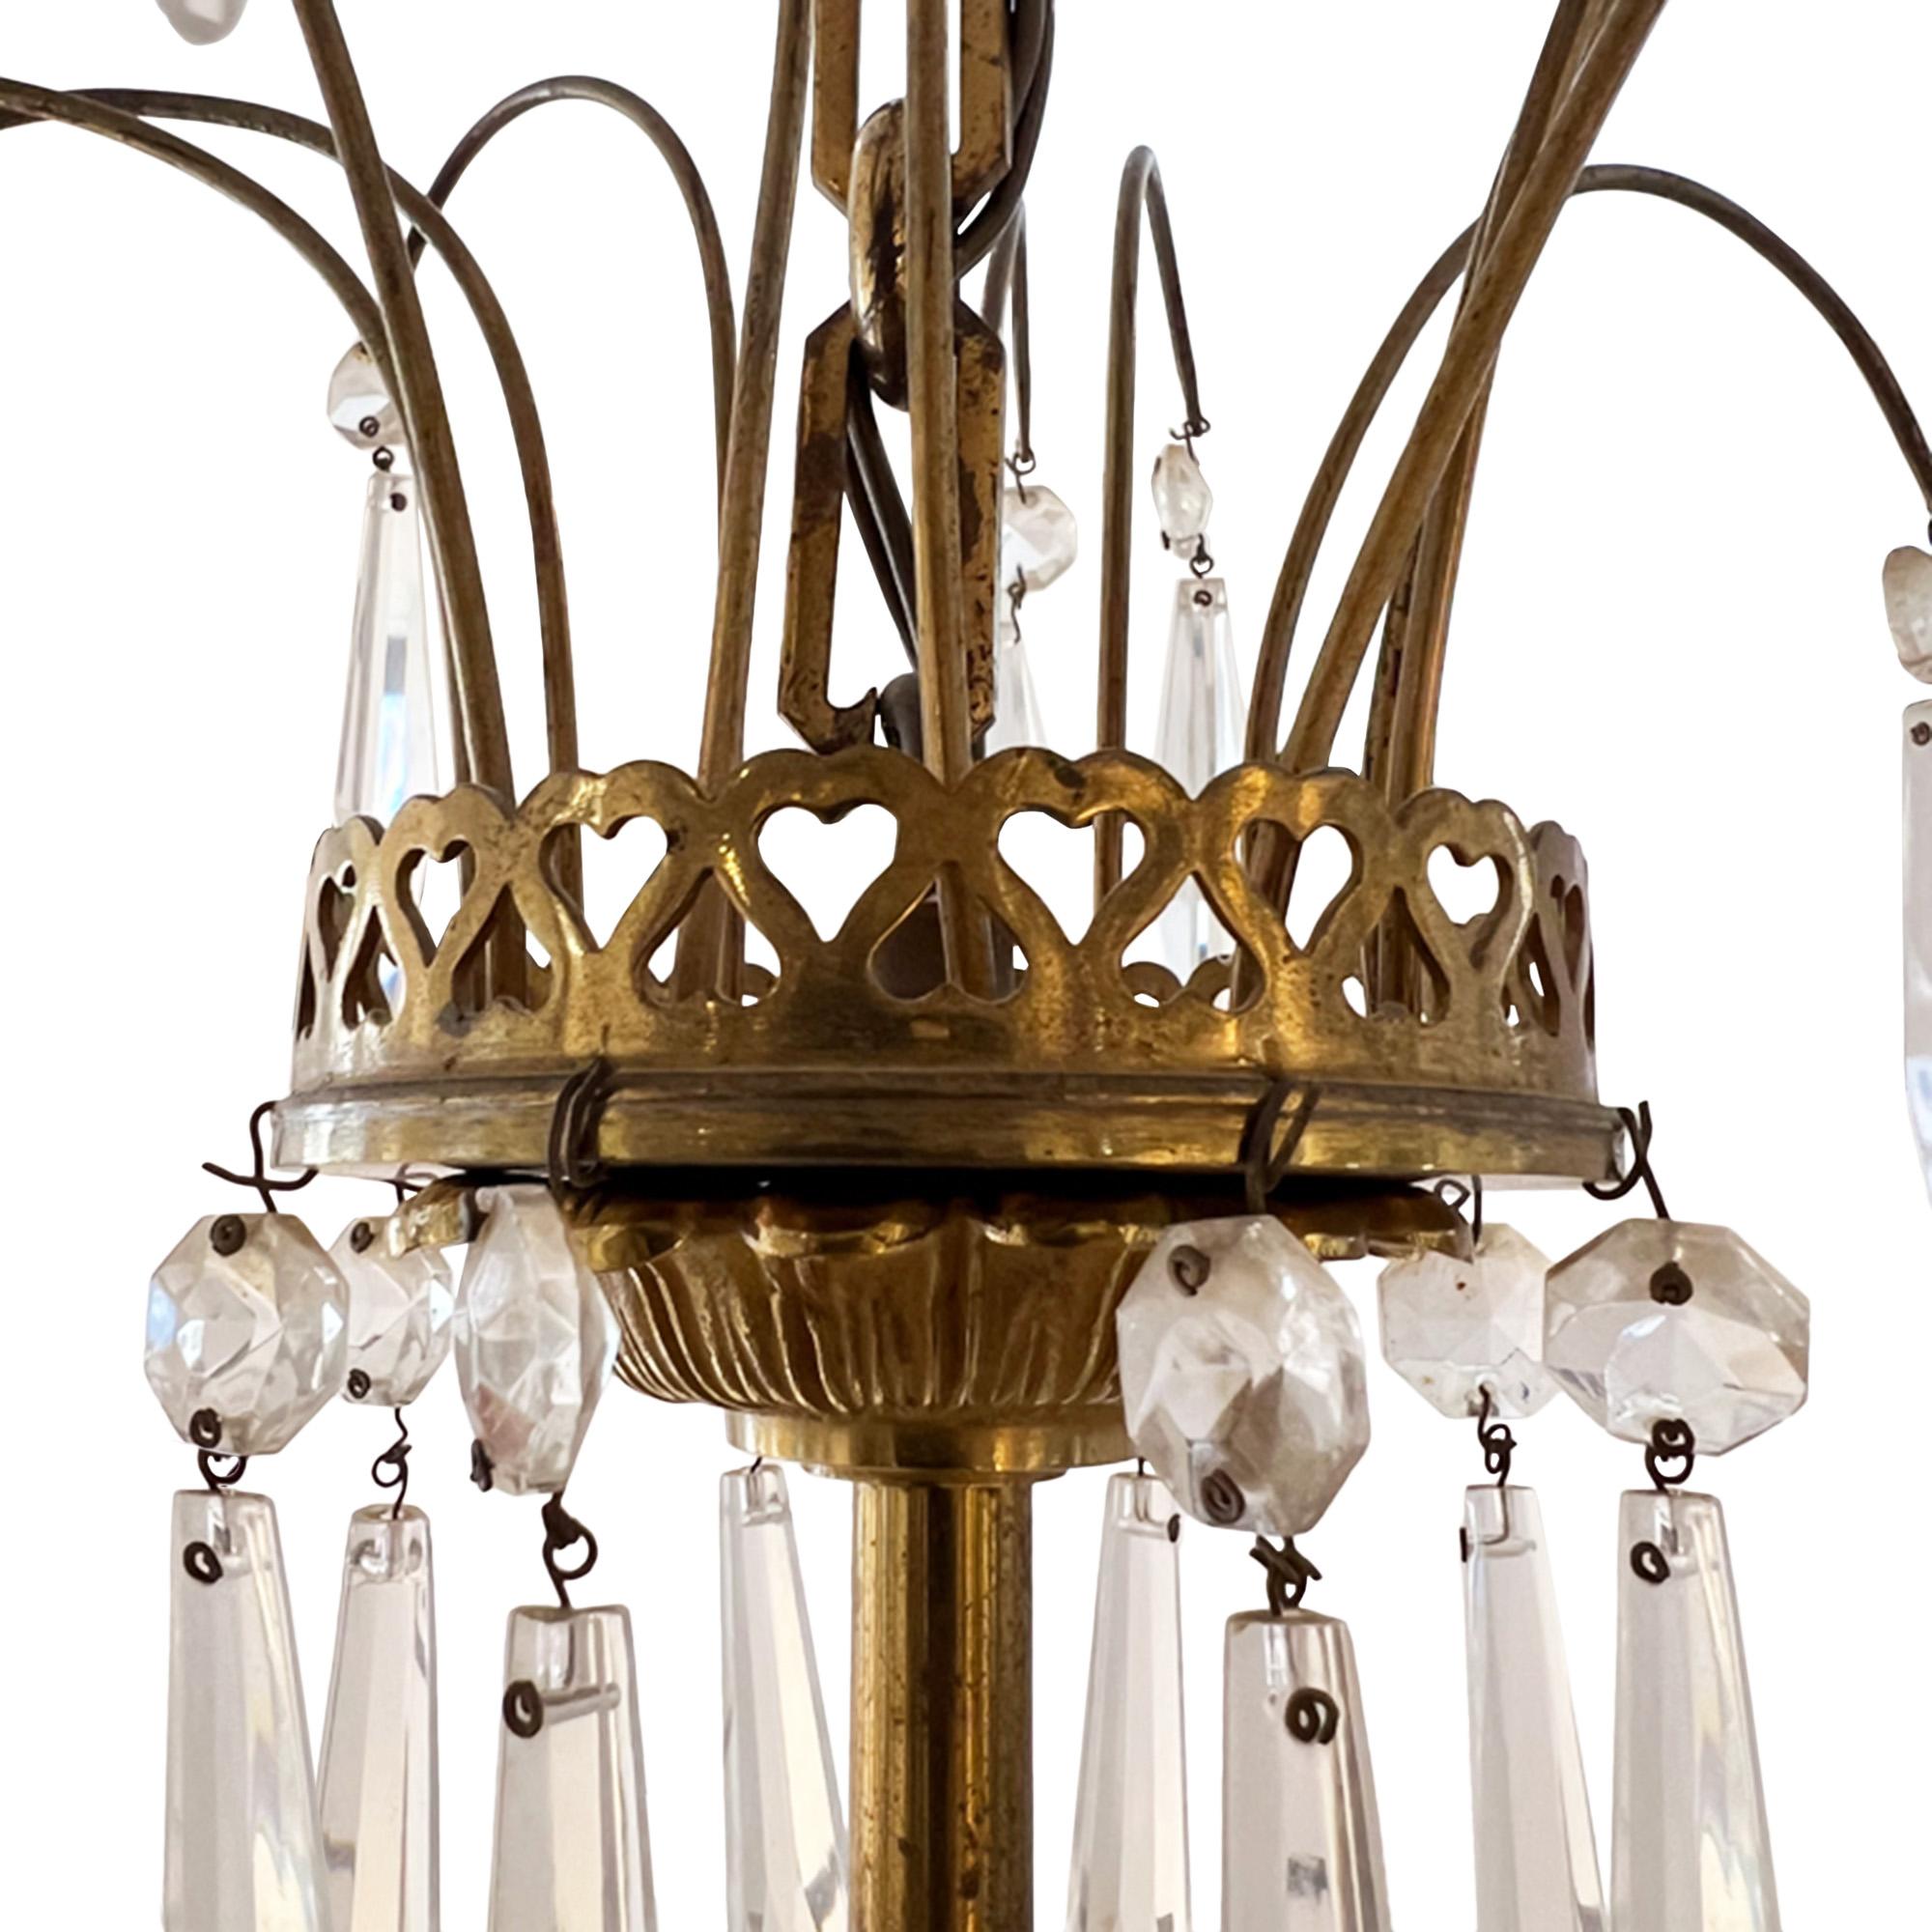 This unusual chandelier was made in France in the 1950s.

Please take a look at all our pictures - the elegantly simple design has lovely touches of detail. From the lovely hearts decorating the top piece of gilt bronze, while leaves decorate the